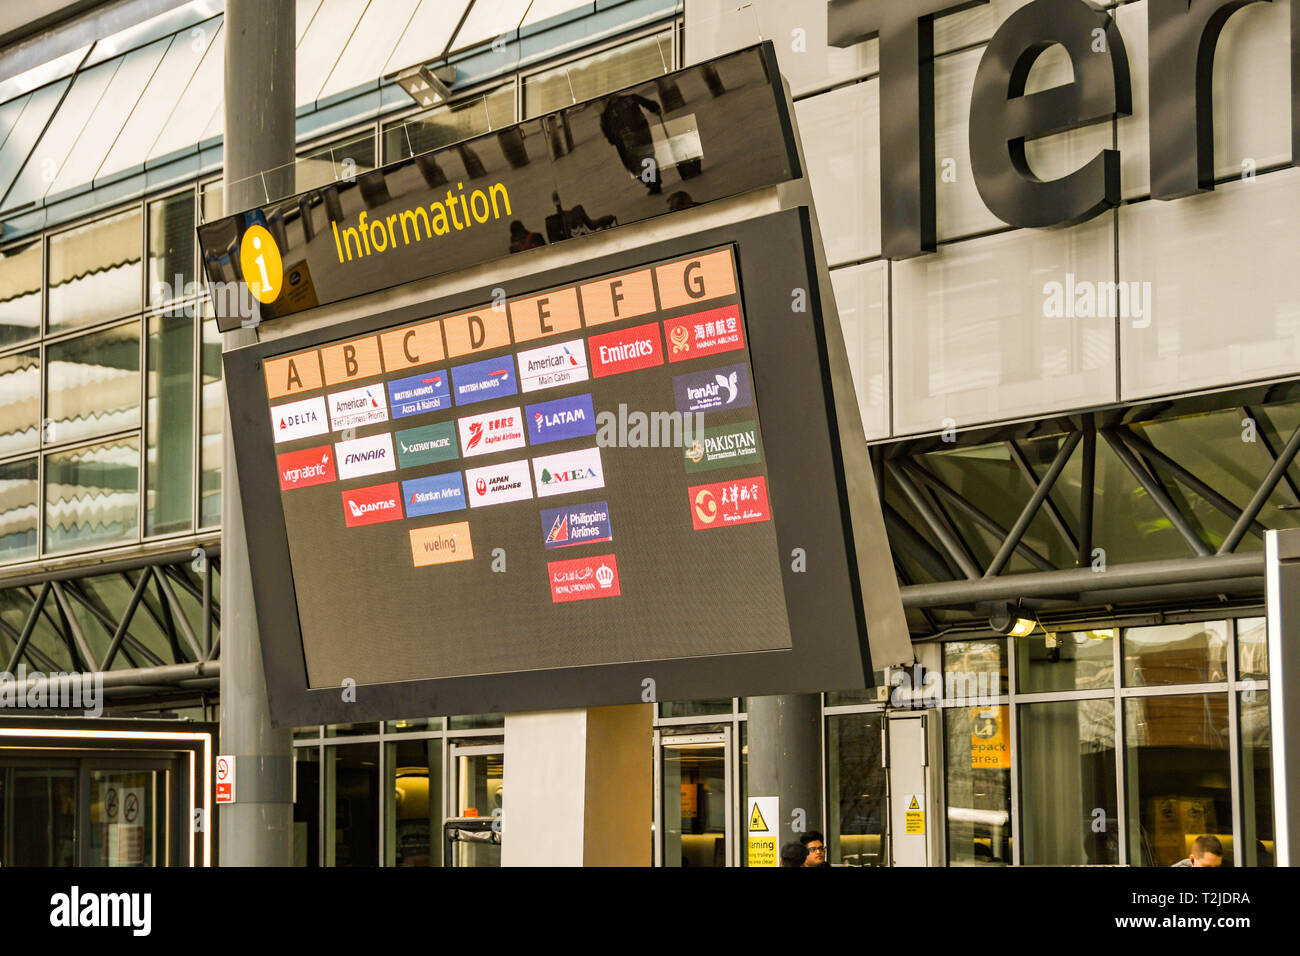 LONDON HEATHROW AIRPORT, ENGLAND - FEBRUARY 2019:  Airline logos showing on an electronic display screen outside London Heathrow Airport Terminal 3 Stock Photo